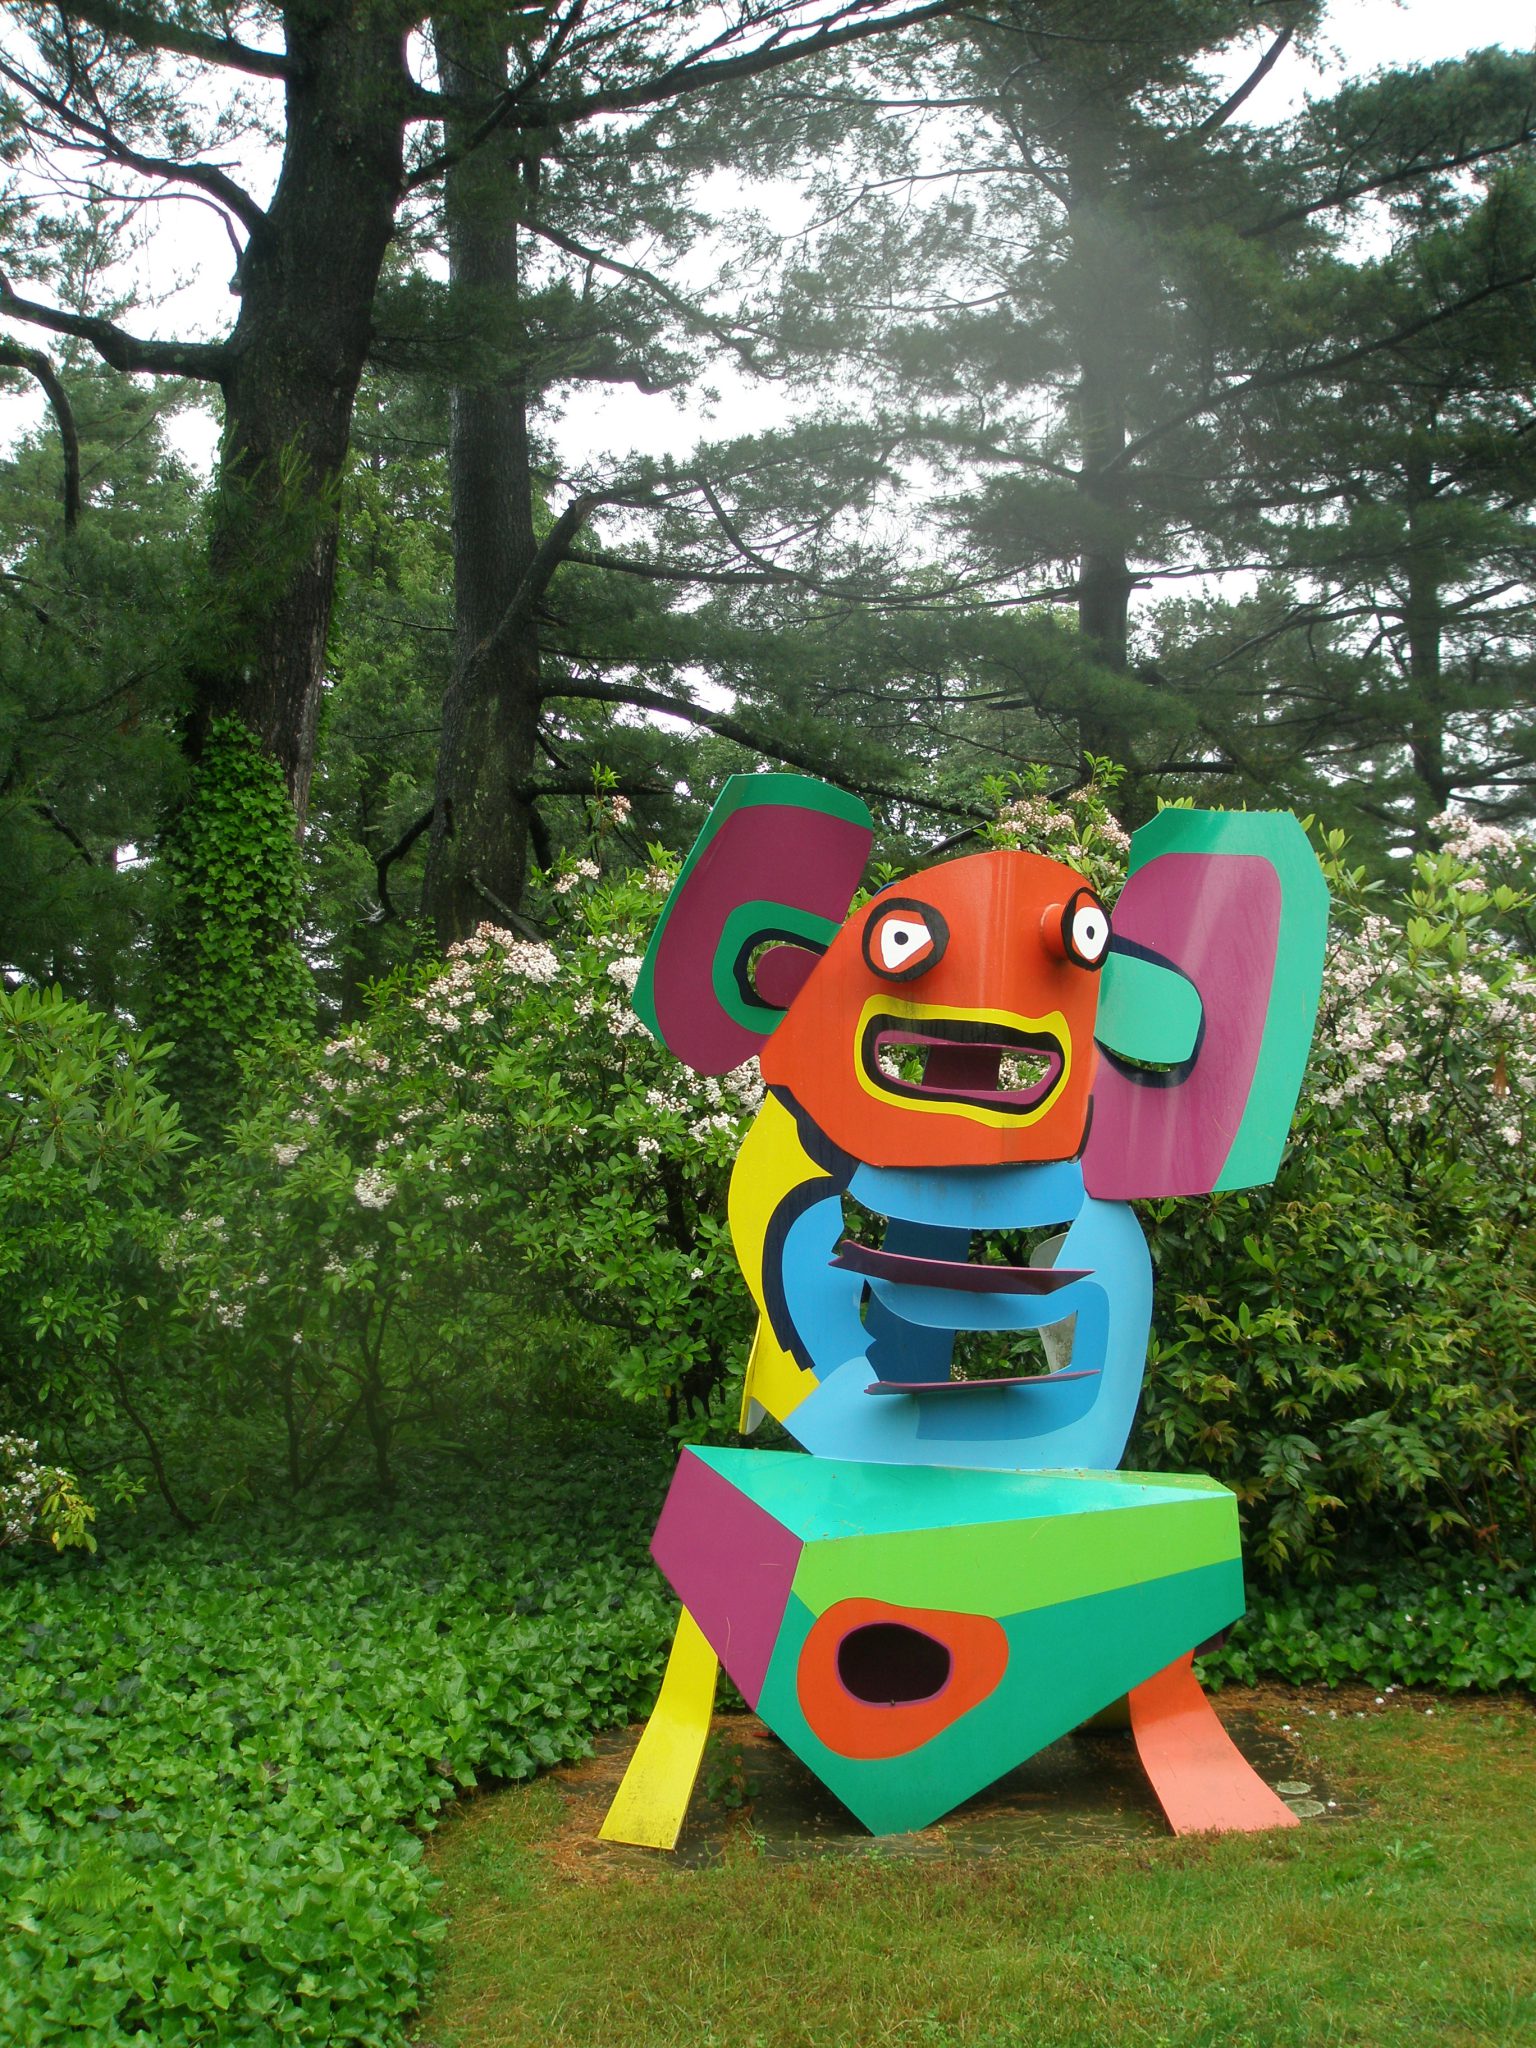 Just south of the Morning Garden is this 9-foot-tall display of Utter Goofiness: Karel Appel's MOUSE ON A TABLE (1971) !!!